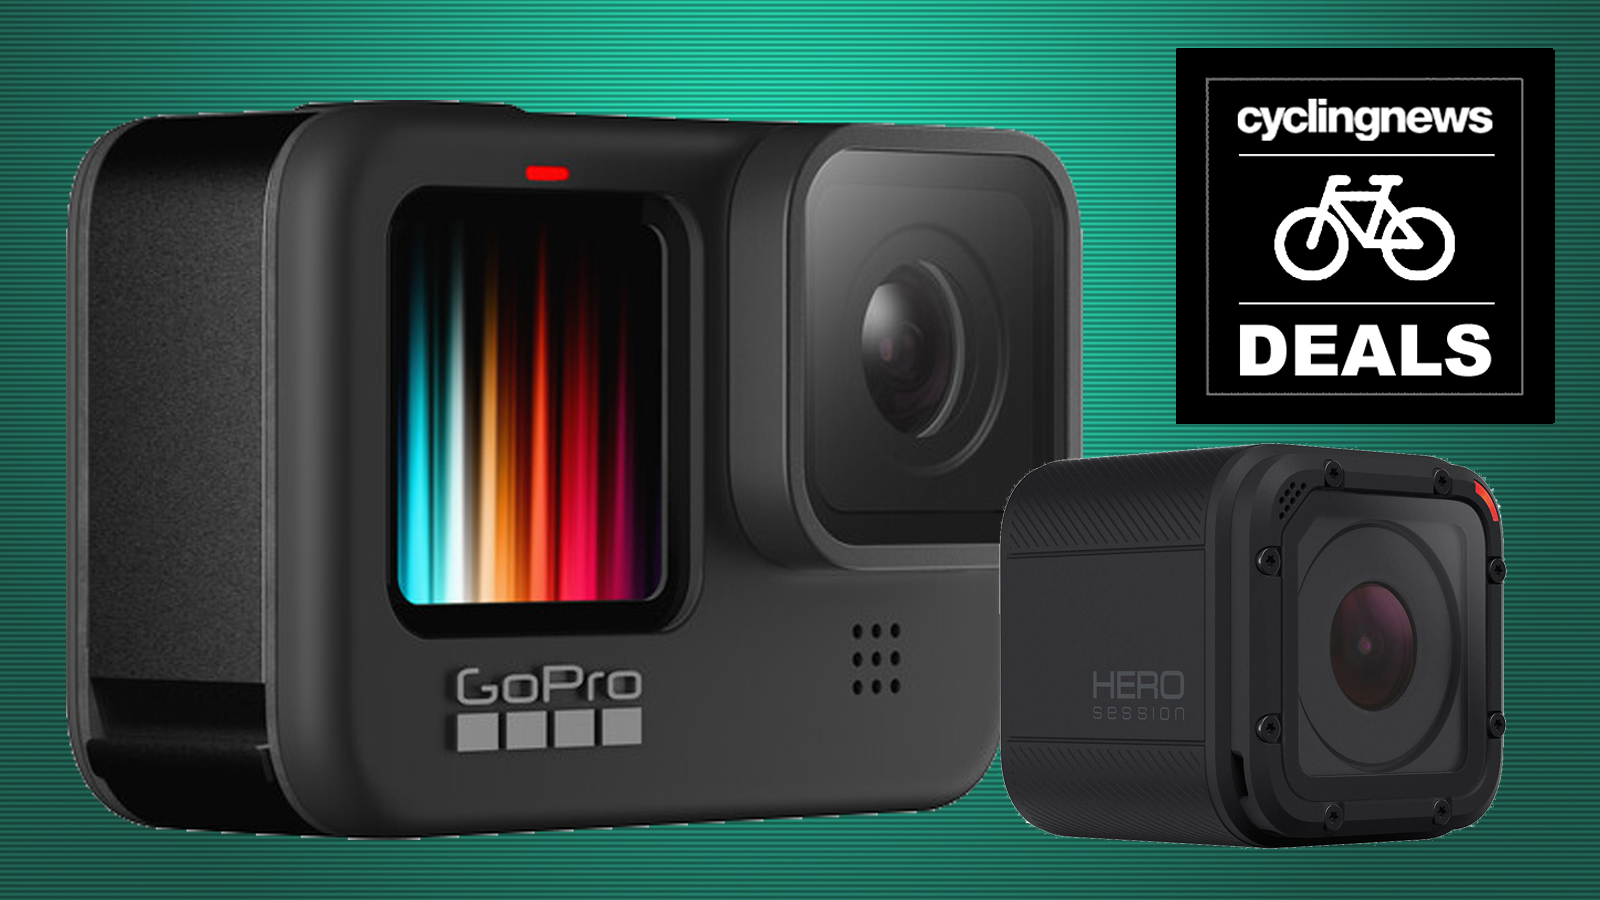 Gopro Deals Get A Third Off A Hero 9 Bundle In Gopro S Holiday Sale Cyclingnews